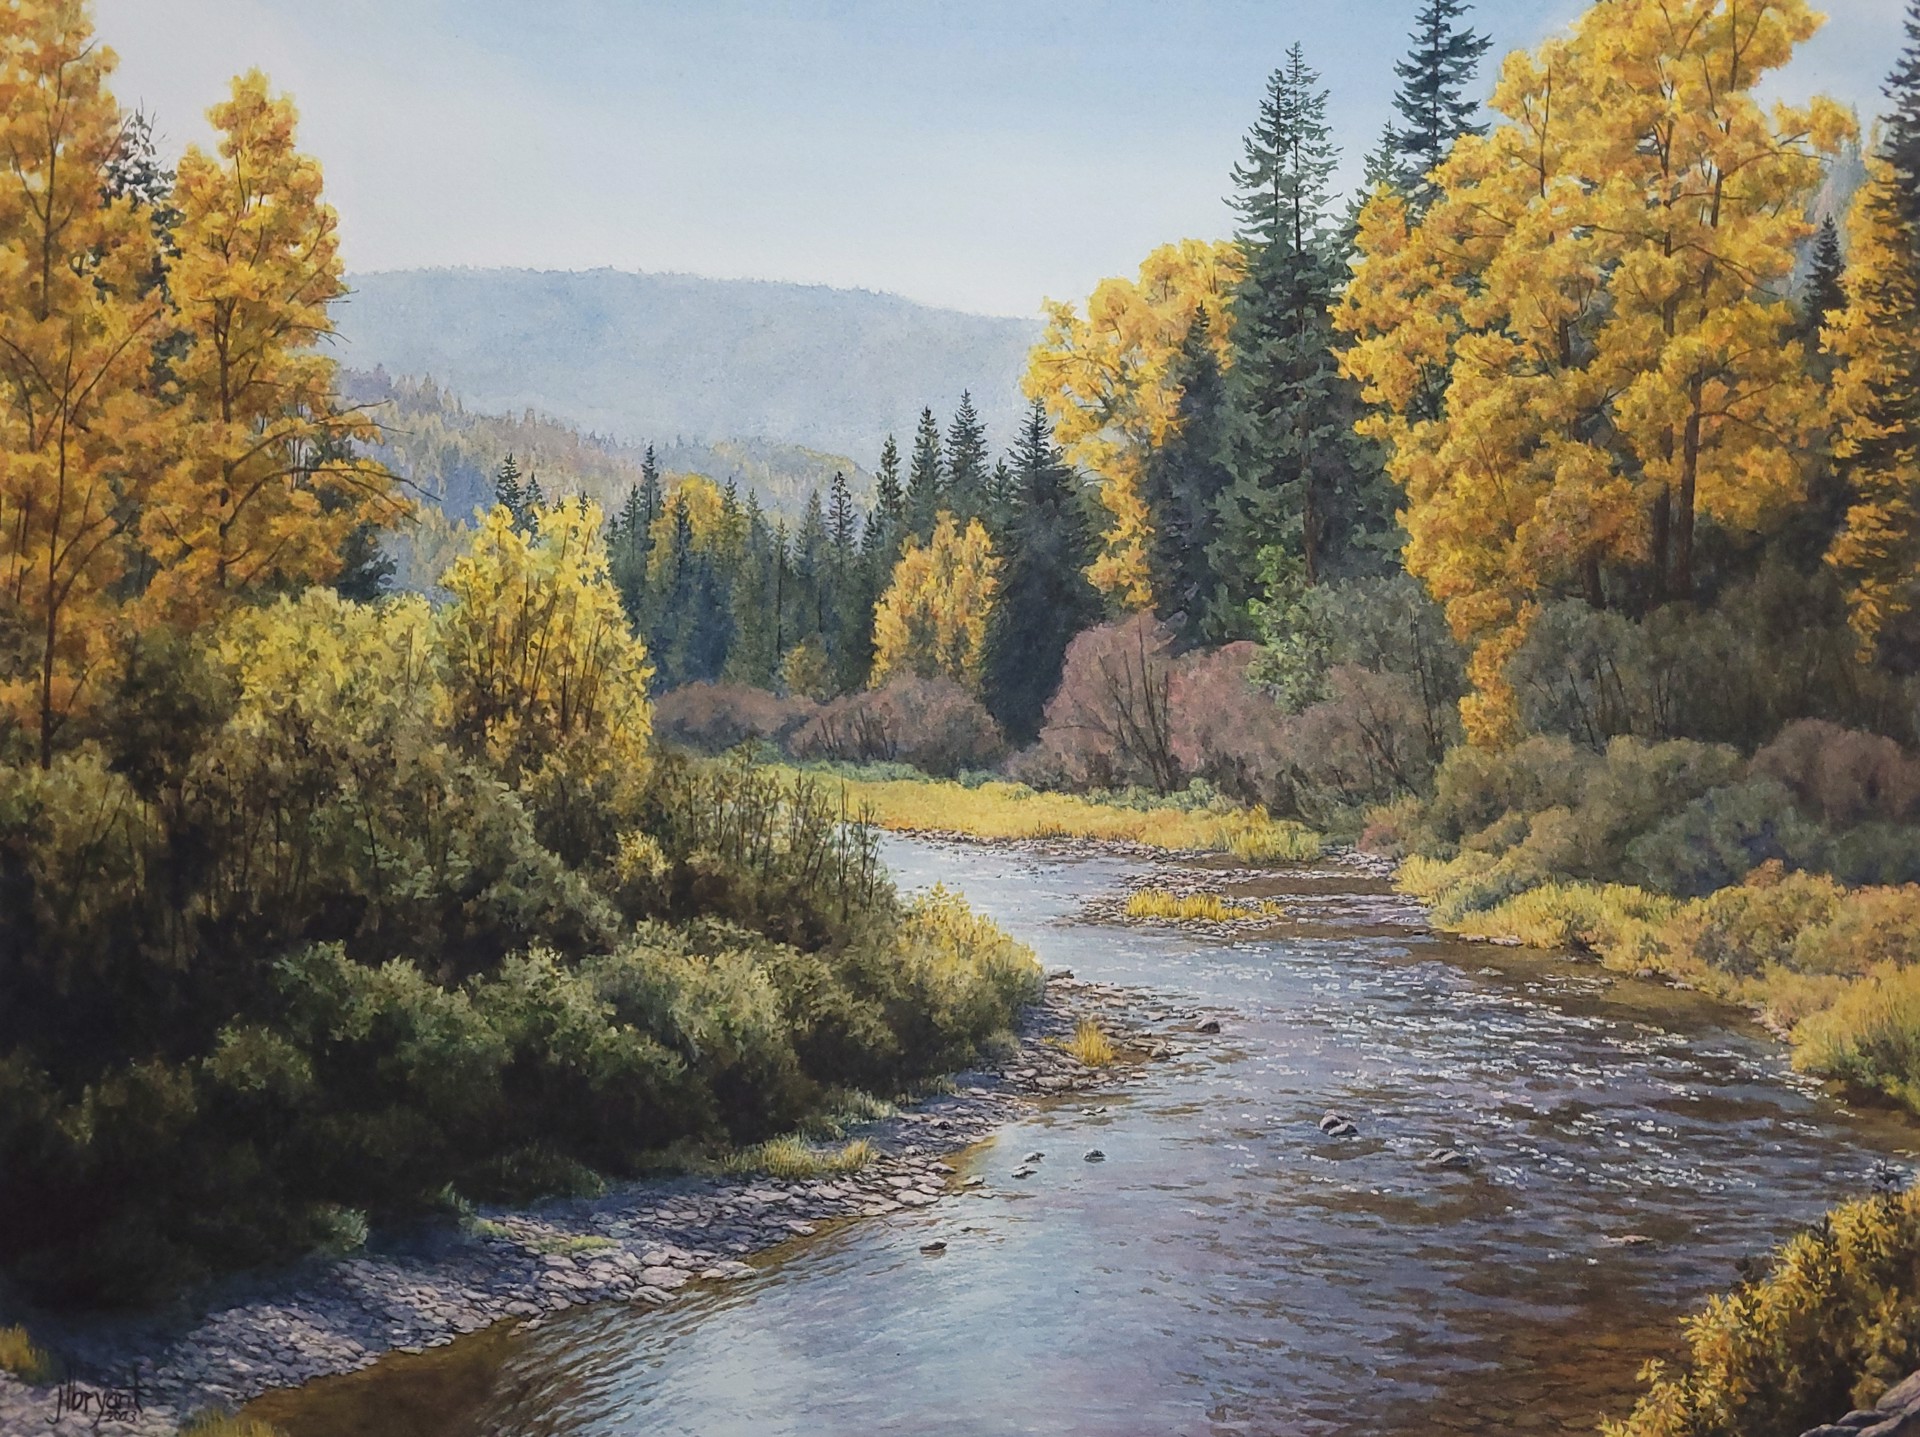 Autumn on Teepee Creek by Jessica Bryant